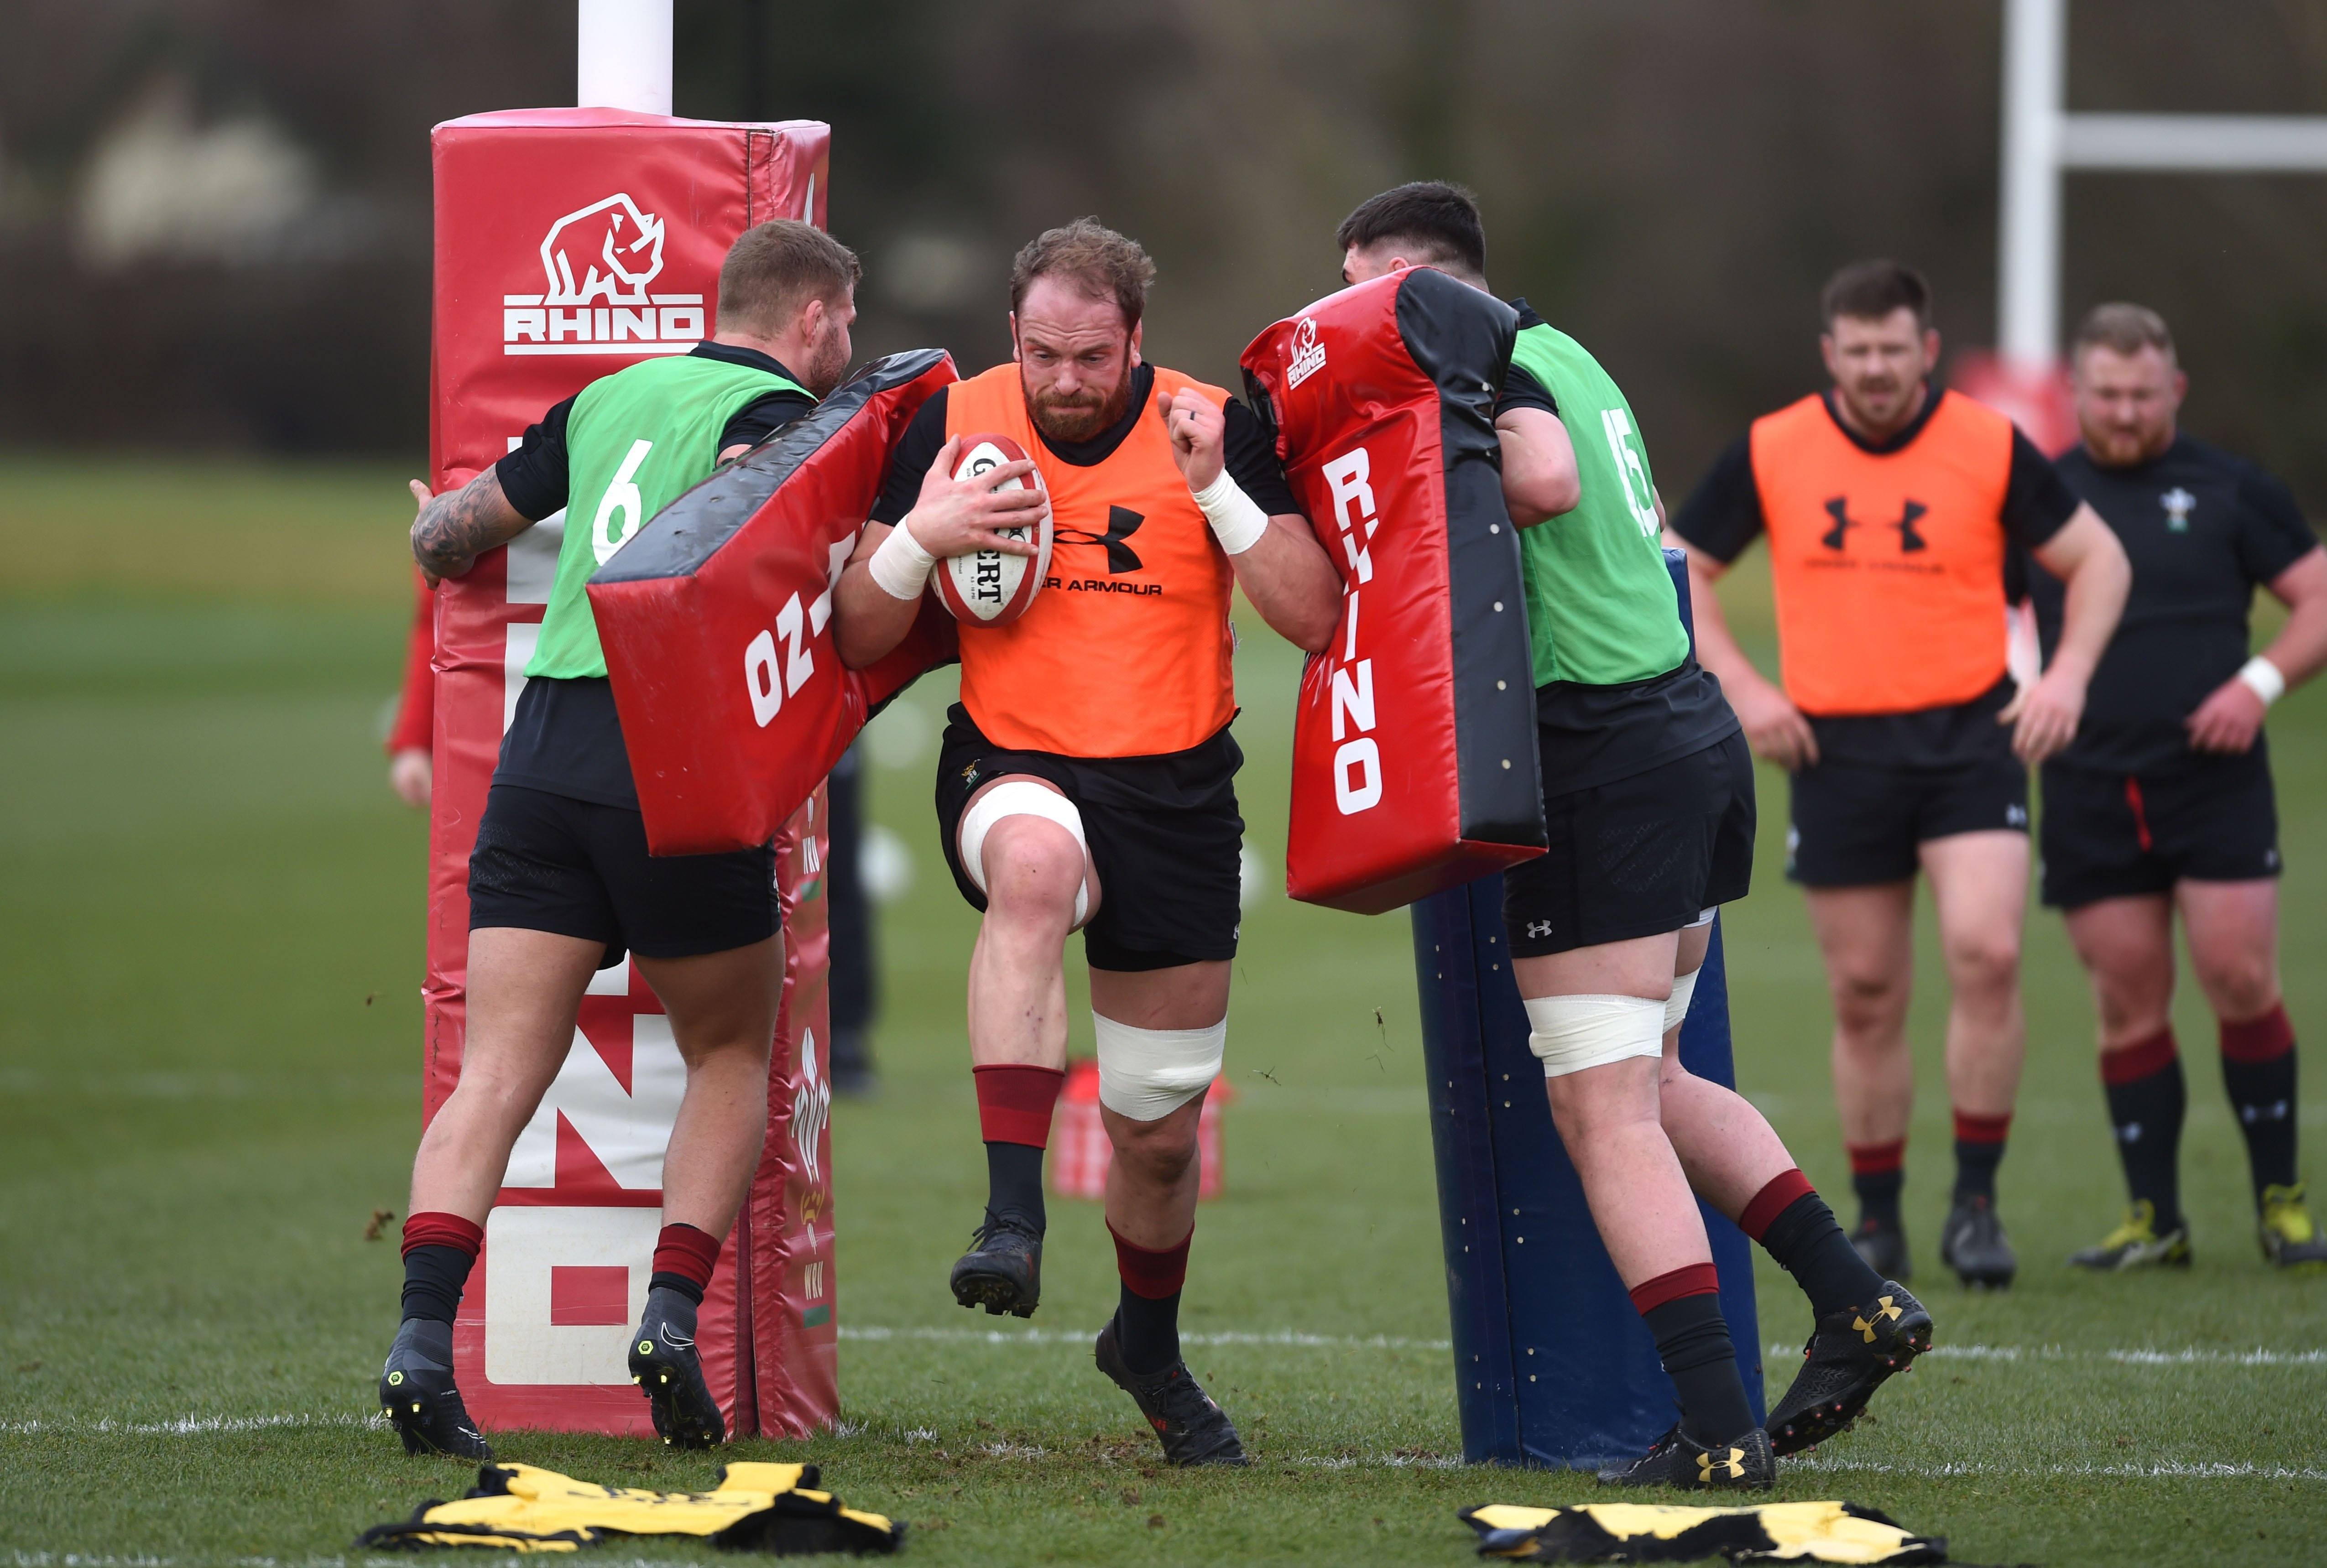 Win the chance to attend a Wales training session